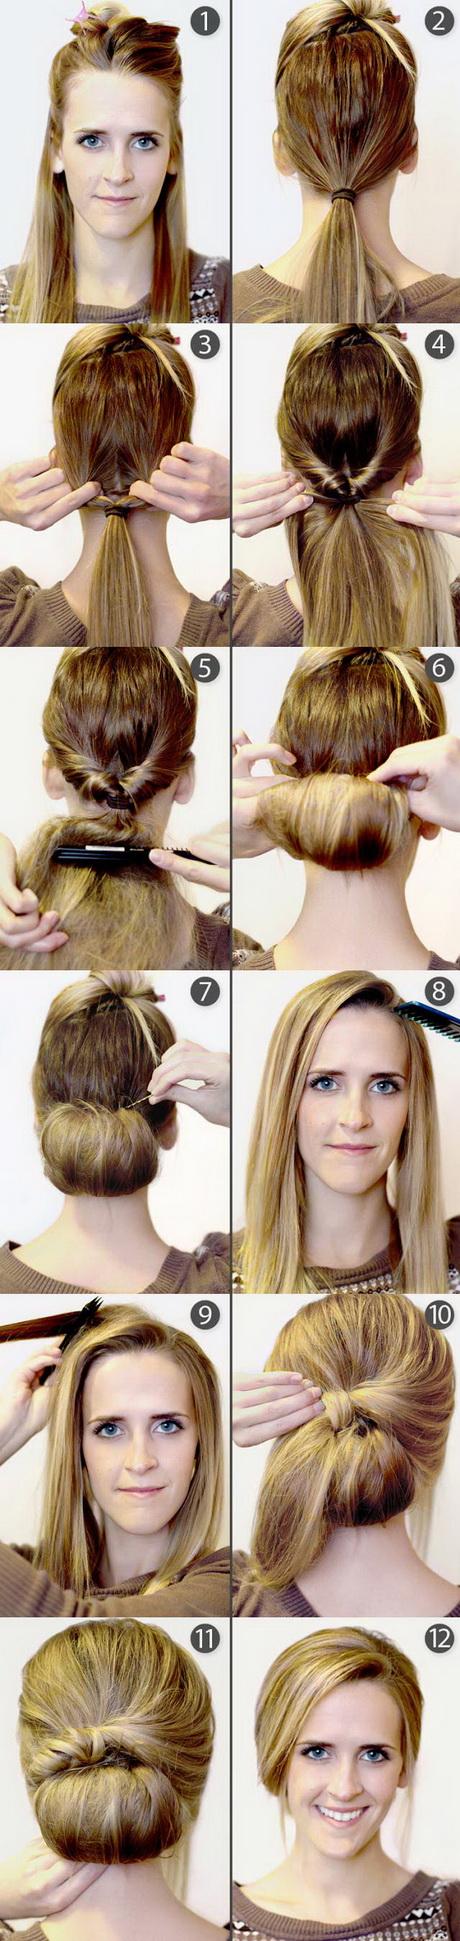 Easy to do braided hairstyles easy-to-do-braided-hairstyles-00_5